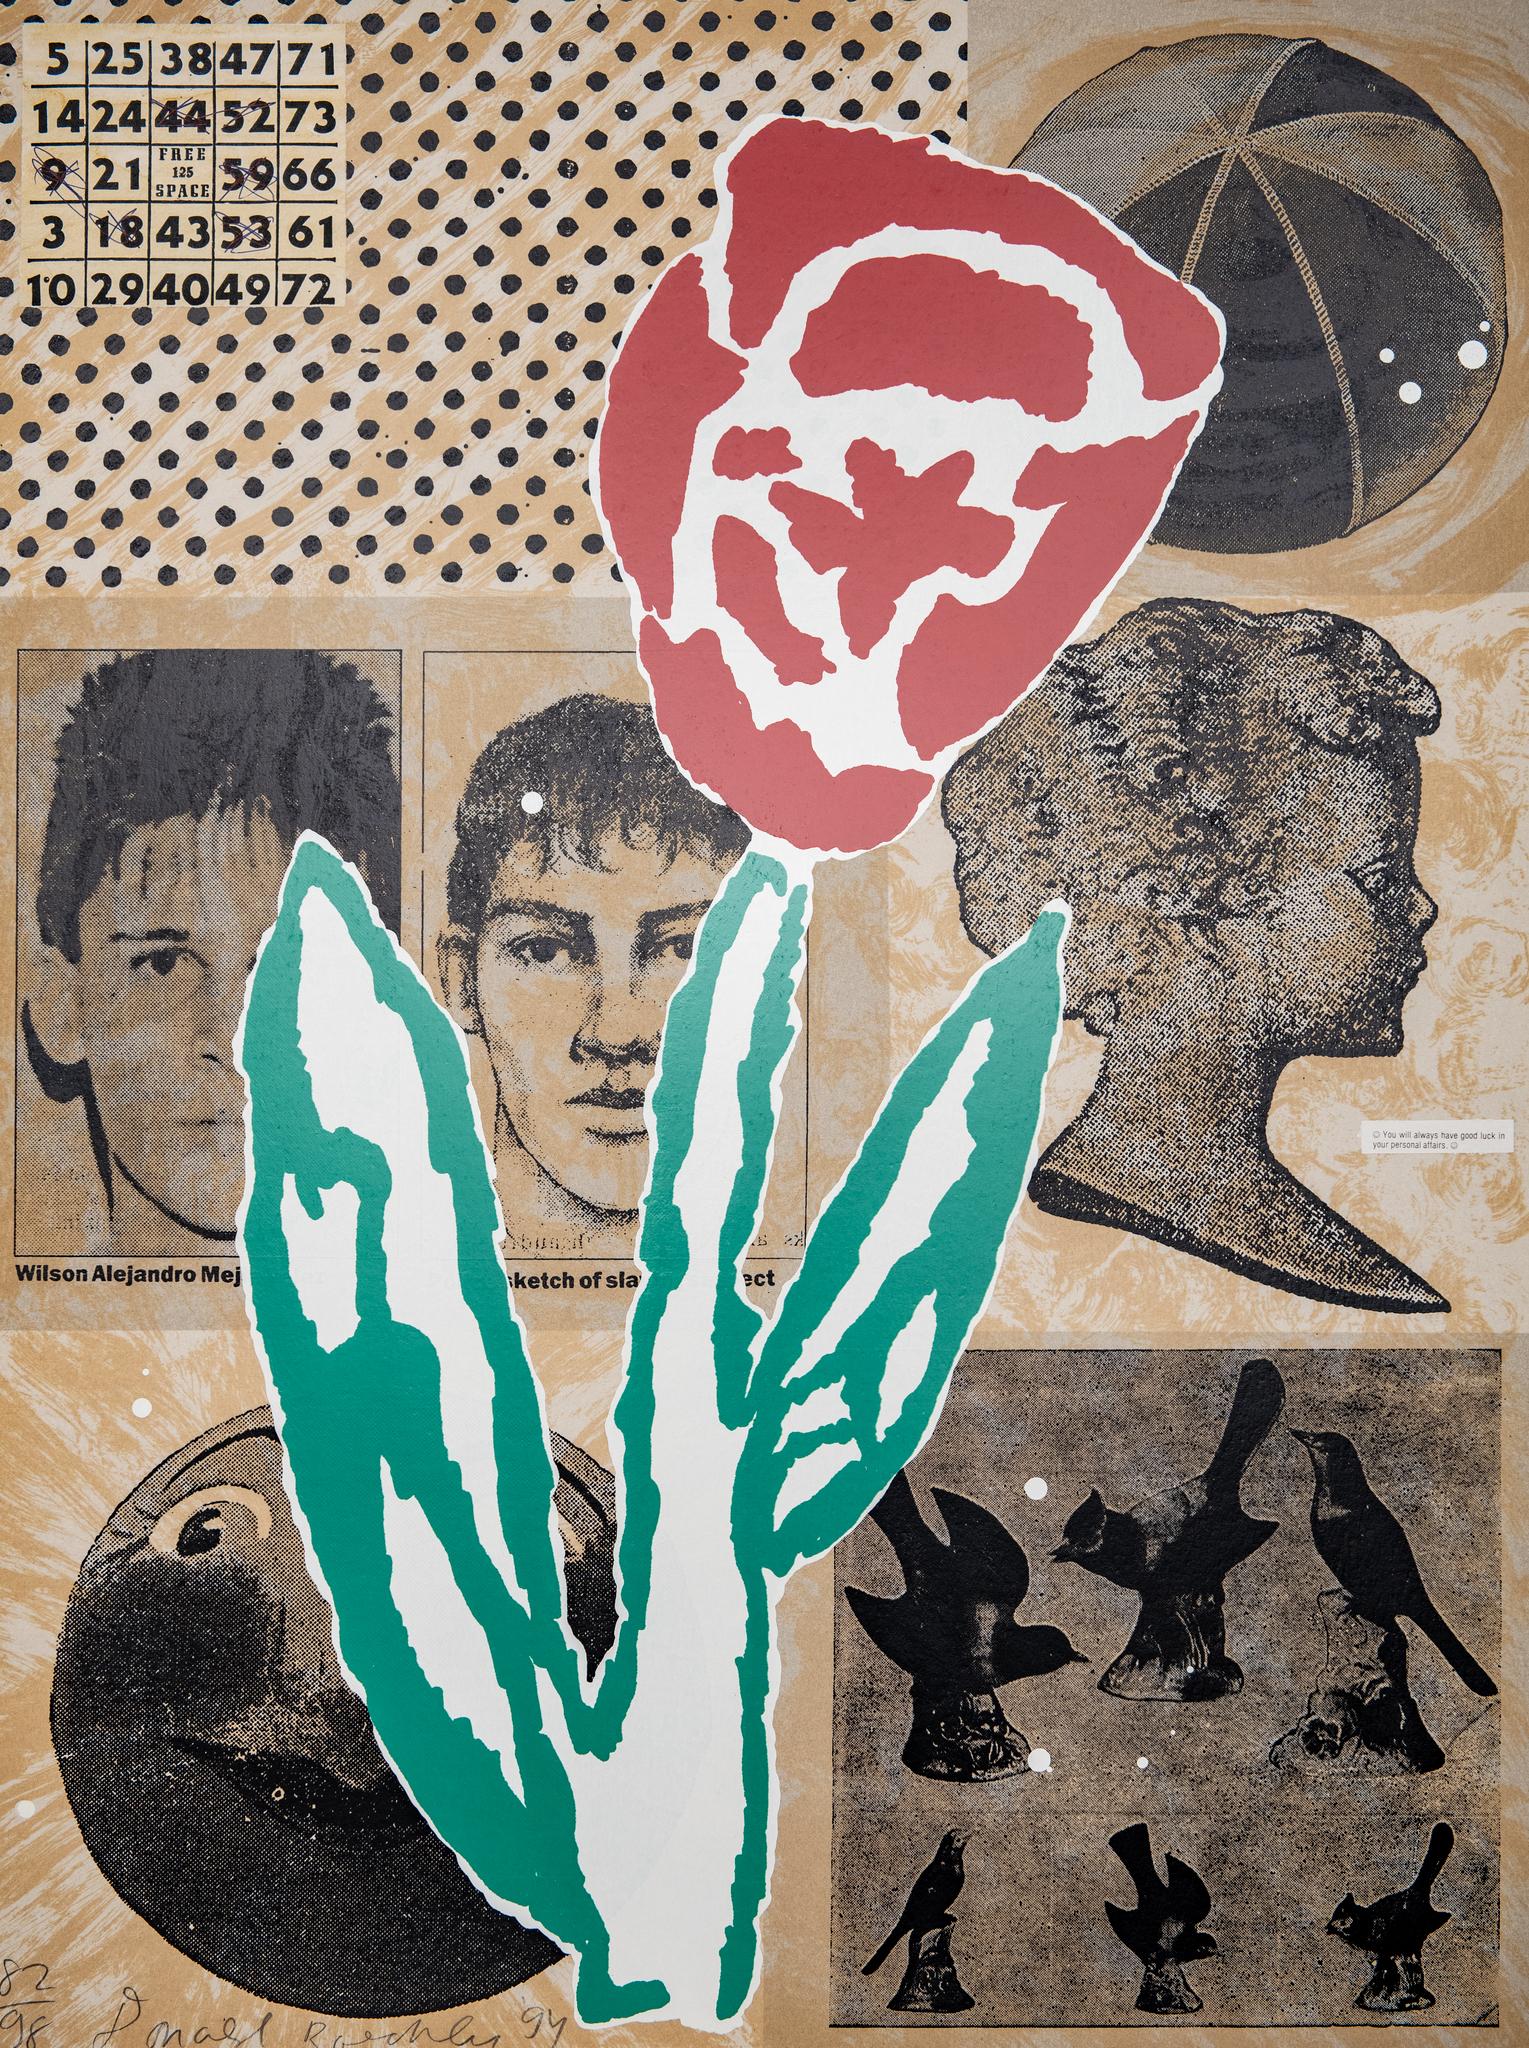 Color screenprint and collage of "Flower" by Donald Baechler.
Neo-expressionism and pop-art